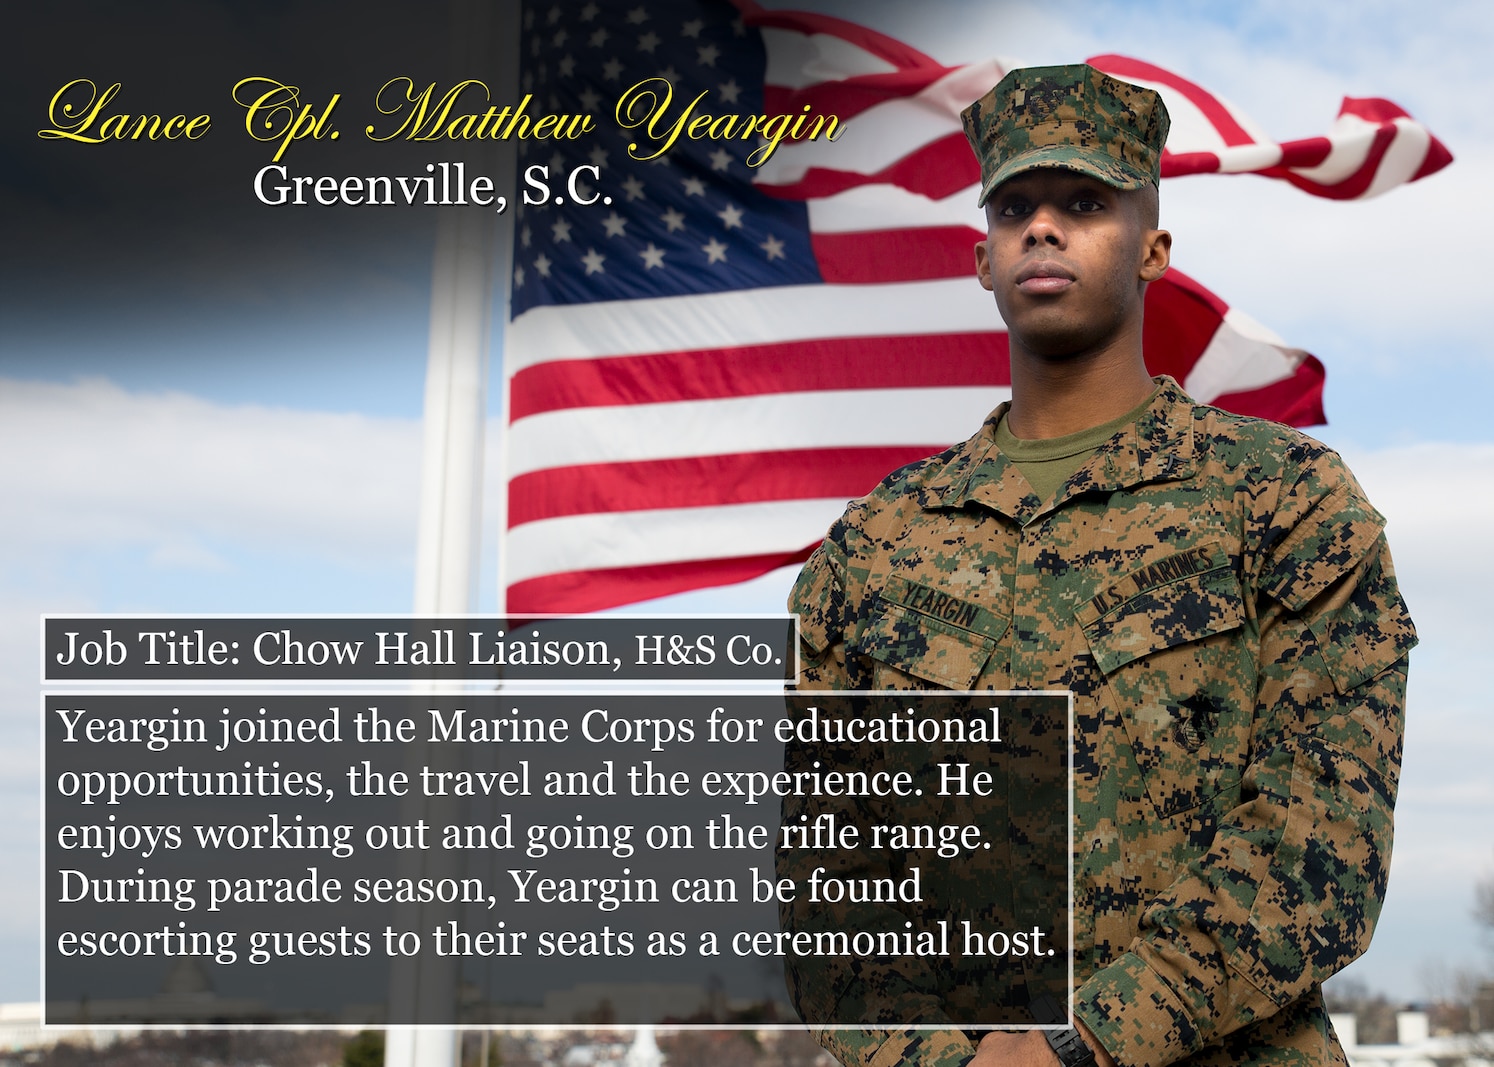 Lance Cpl. Matthew Yeargin
Greenville, S.C.
Job Title: Chow Hall Liaison, H&S Co.
Yeargin joined the Marine Corps for educational opportunities, the travel and the experience. He enjoys working out and going on the rifle range. During parade season, Yeargin can be found escorting guests to their seats as a ceremonial host.
(Official Marine Corps graphic by Cpl. Chi Nguyen/Released)